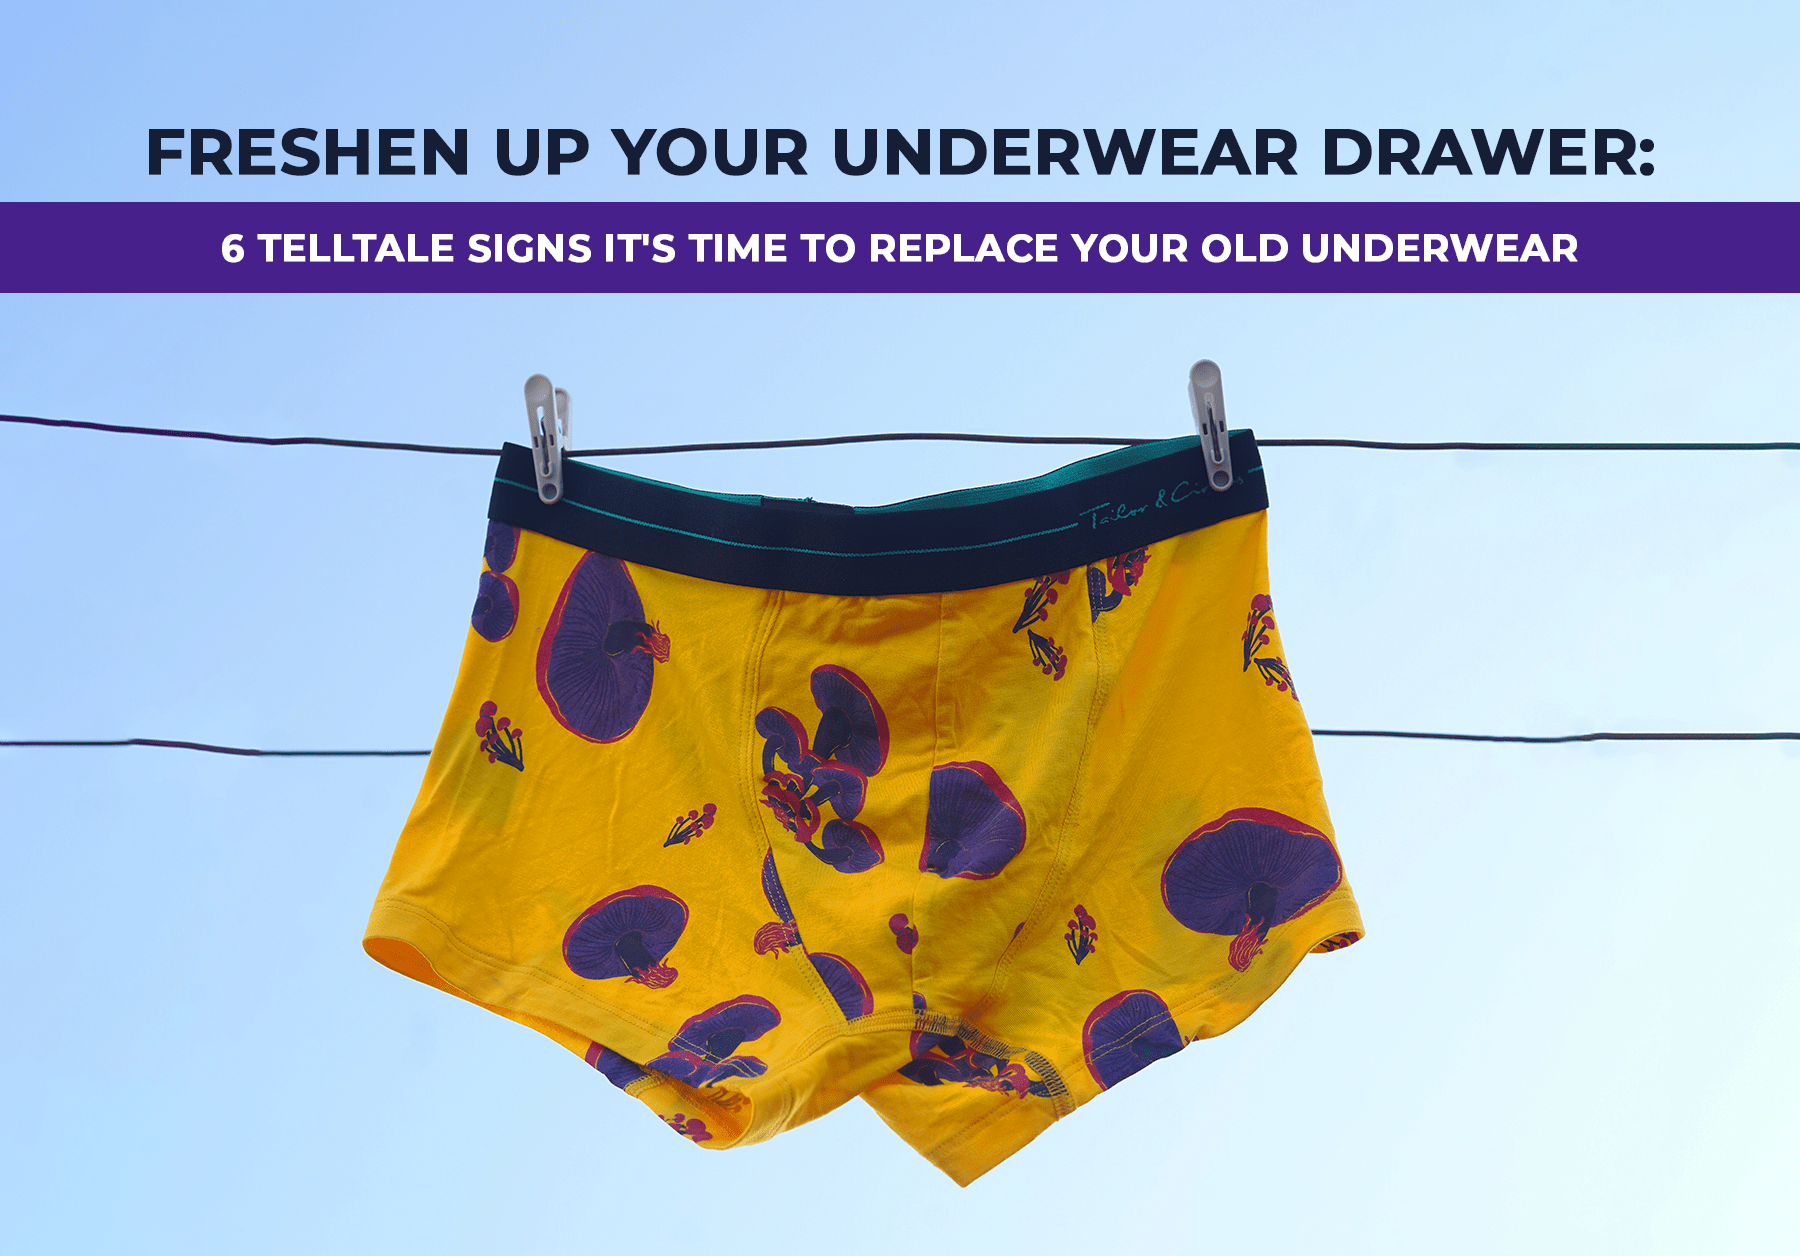 Freshen Up Your Underwear Drawer: 6 Telltale Signs It’s Time to Replace Your Old Underwear